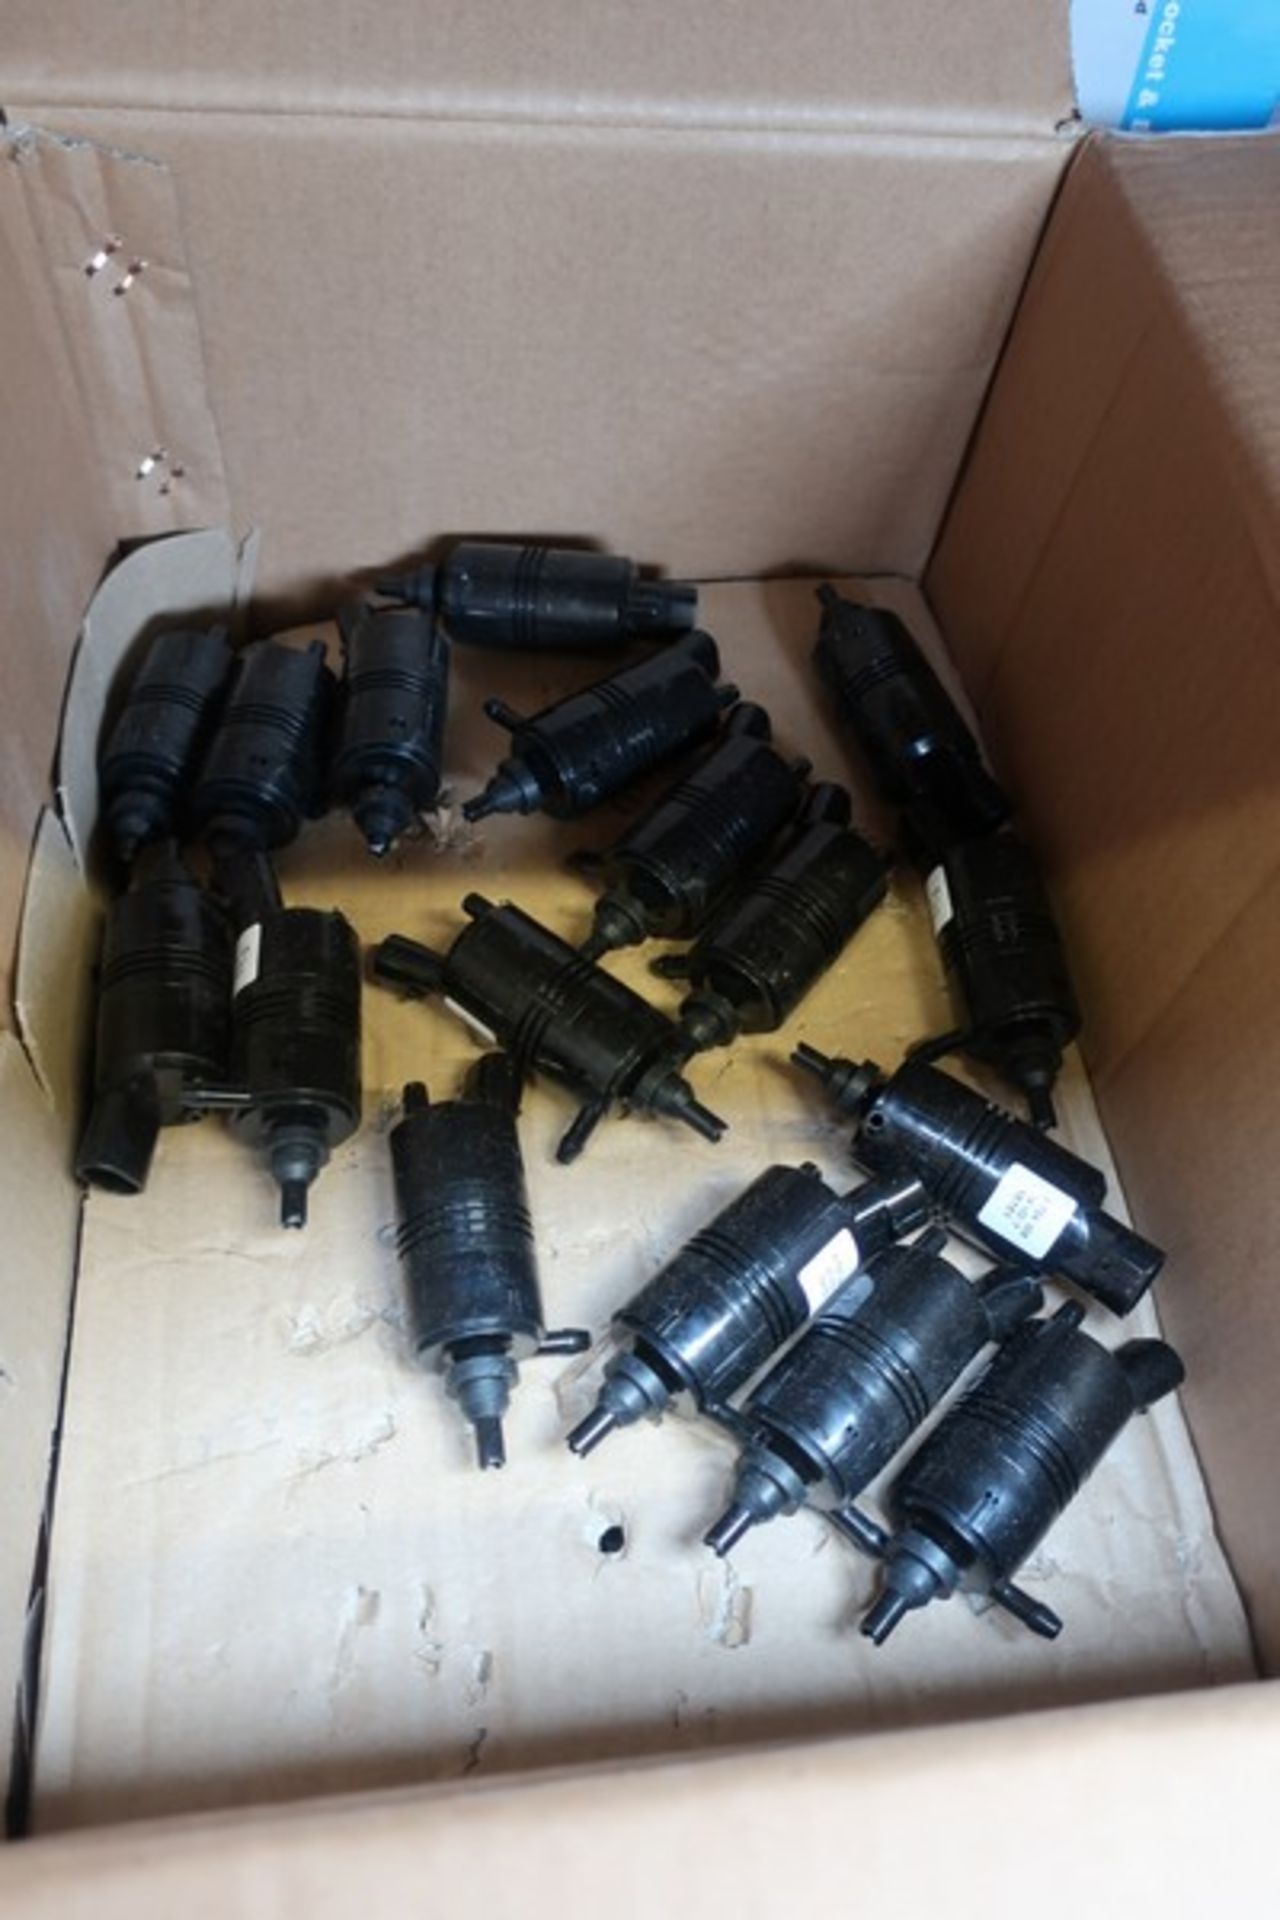 A quantity of as new 24 volt weather packs 70000156 - SL (Approximately 30).